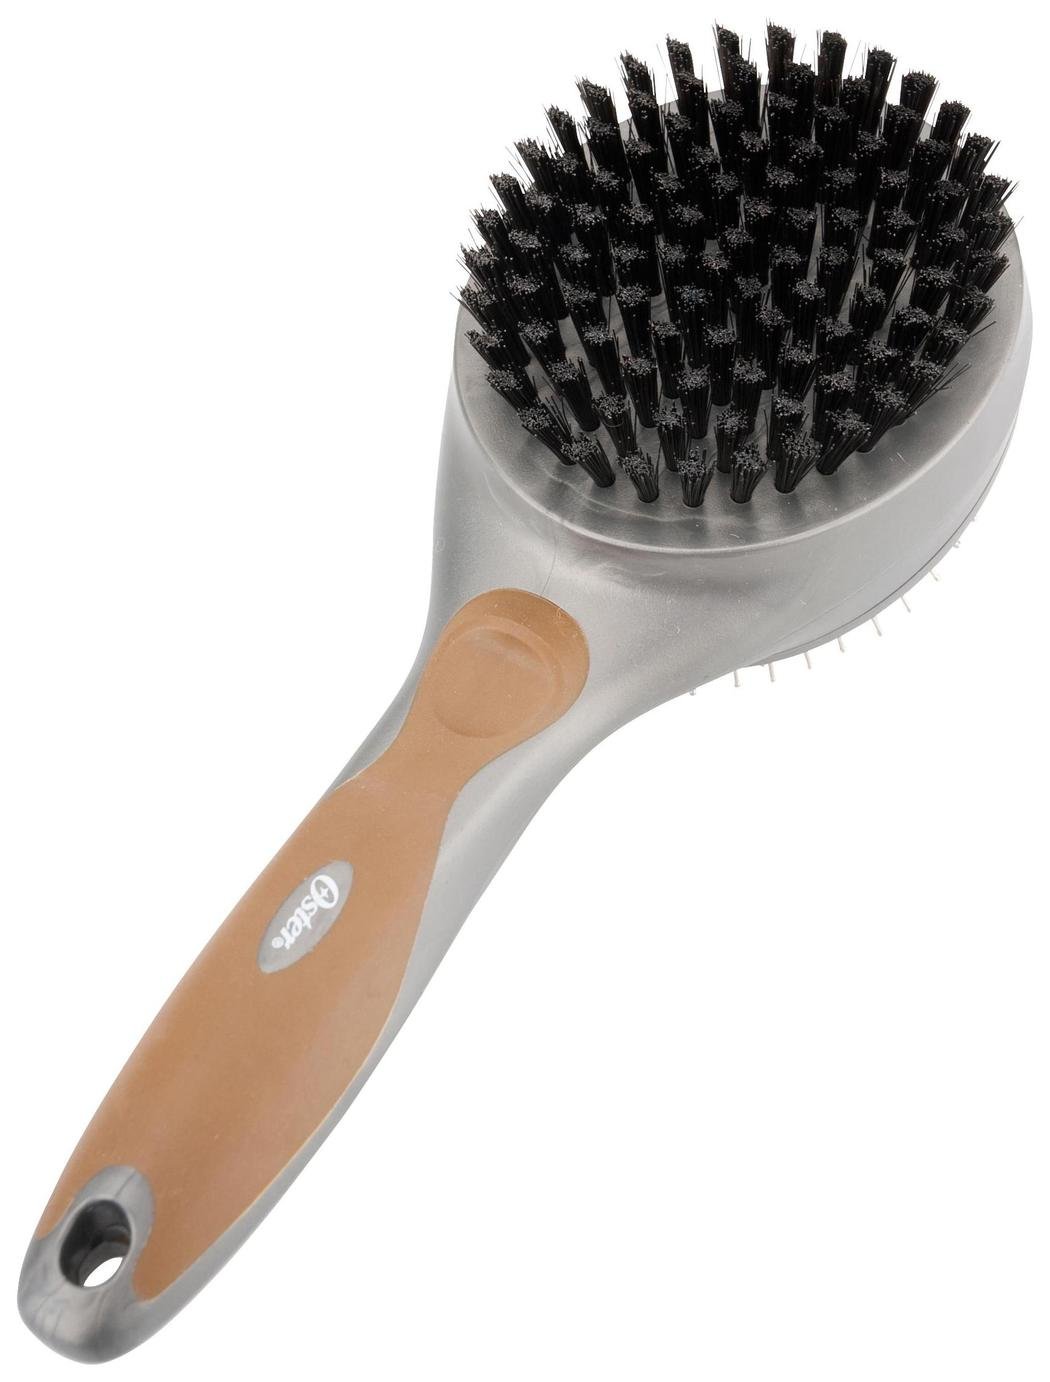 Oster Premium Combo 2 in 1 Brush review